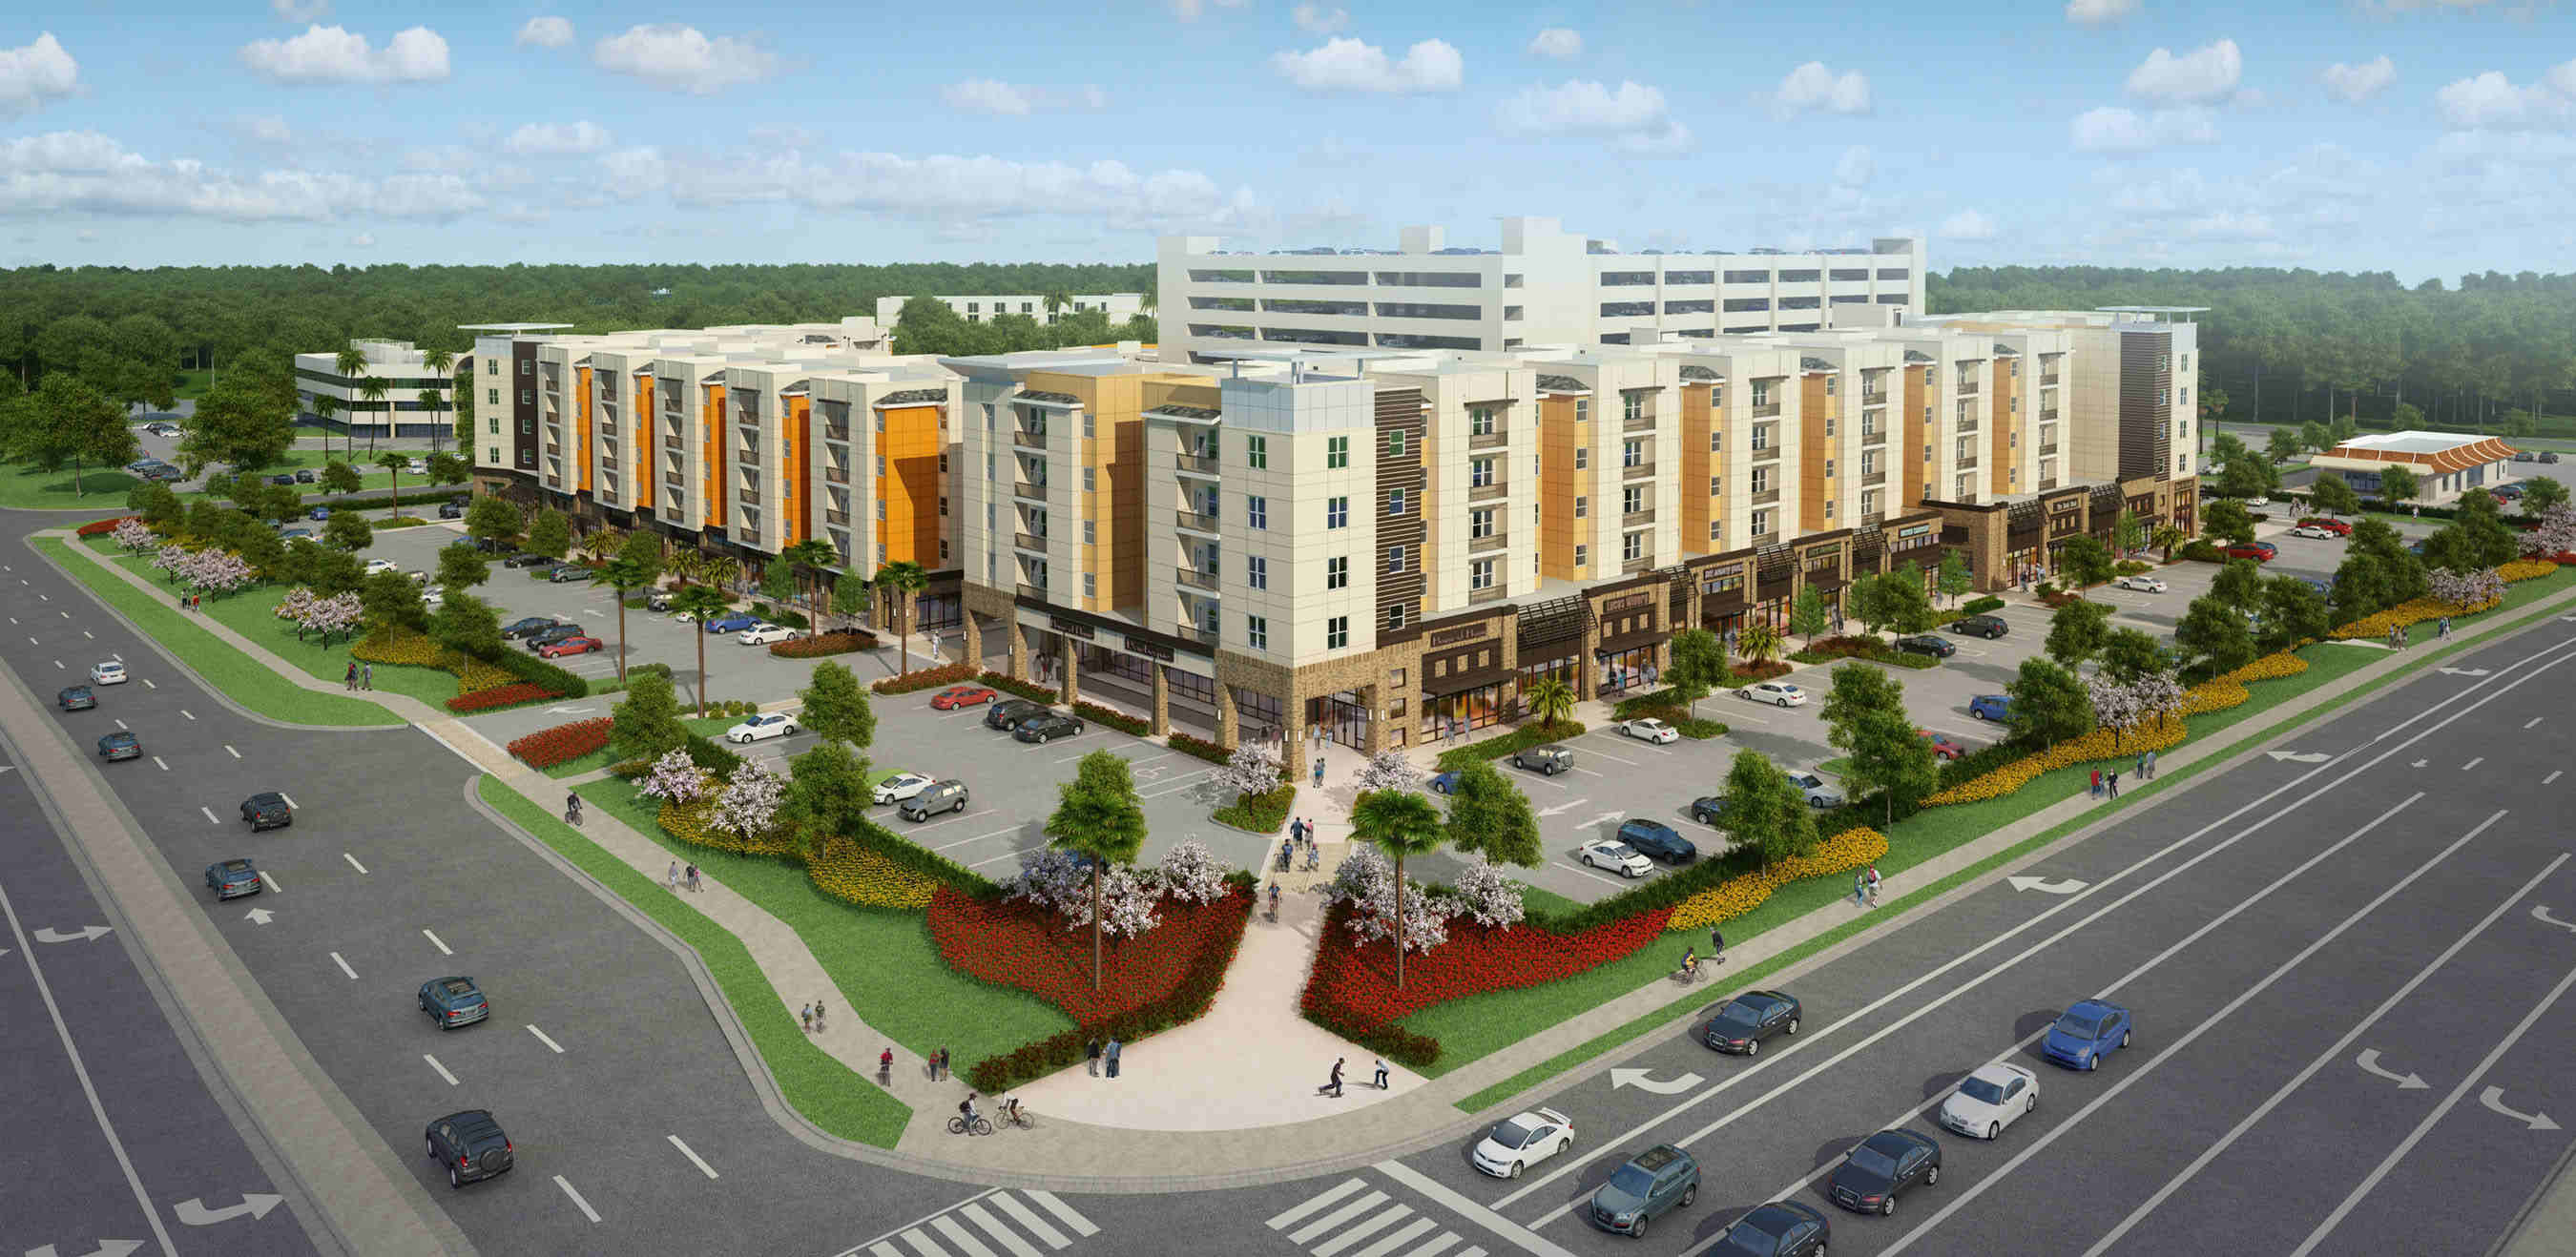 Major housing project for UCF students WDBO